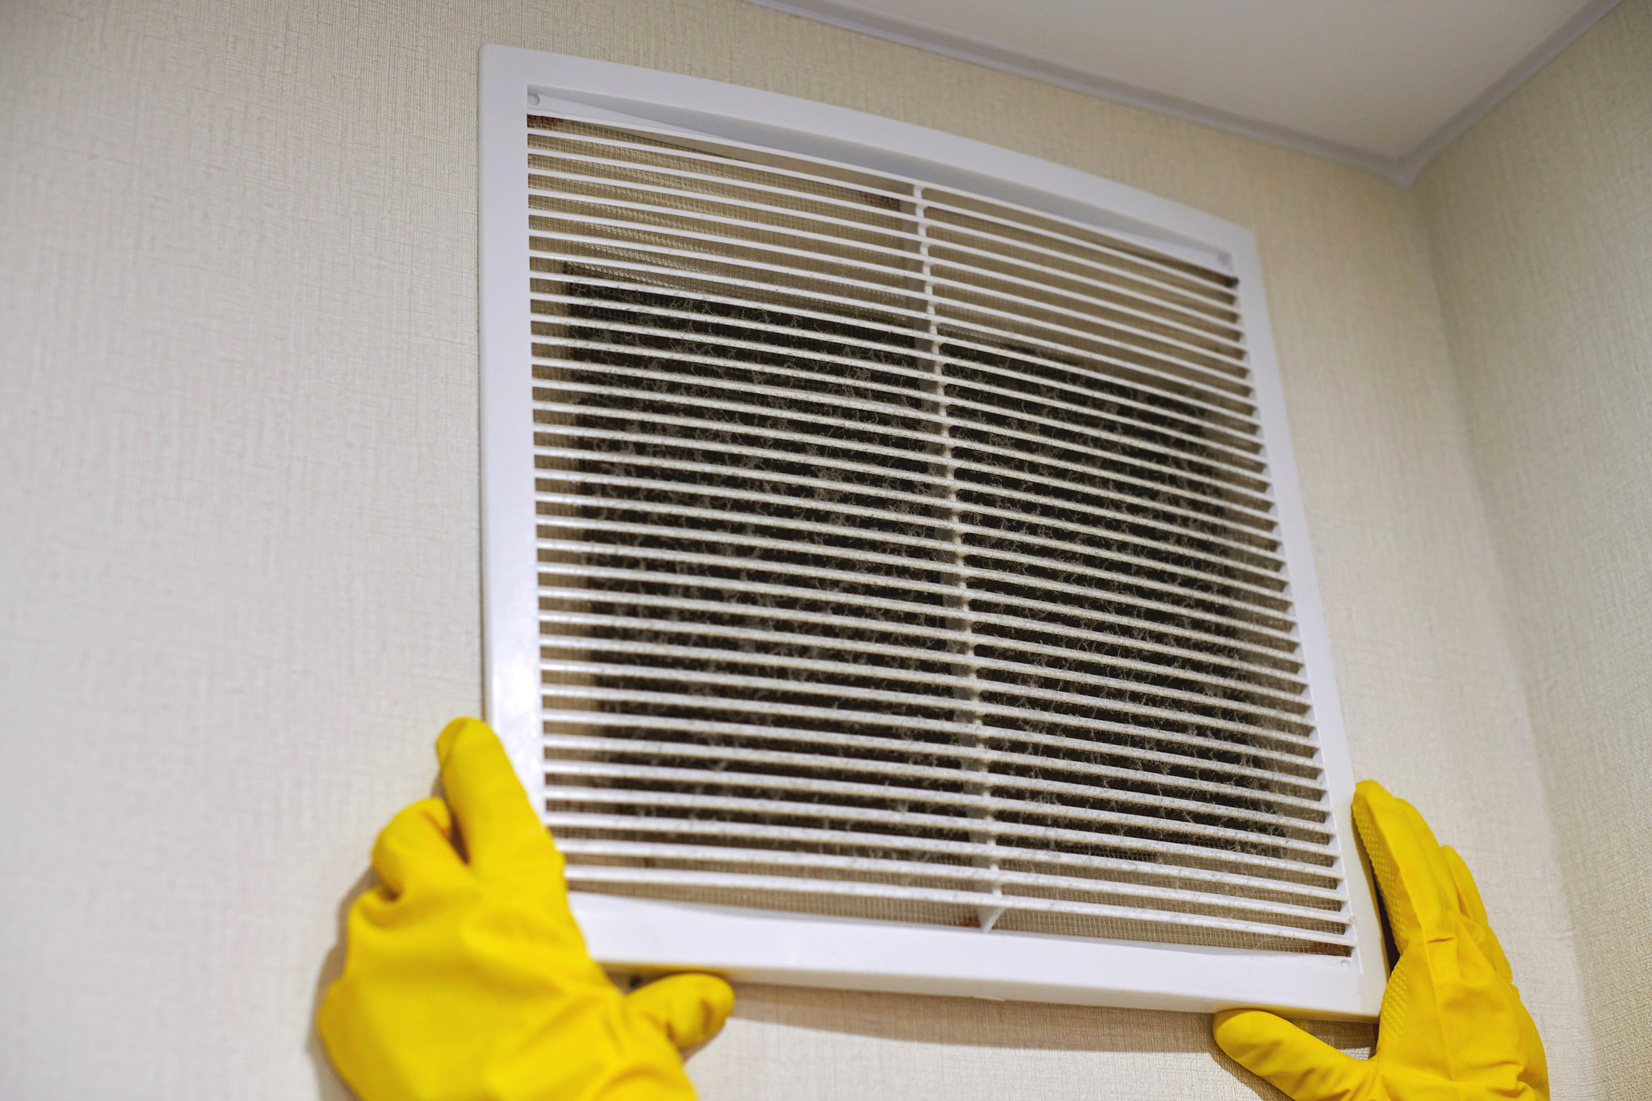 Holding Ventilation Grill of HVAC for Cleaning or Replacing.